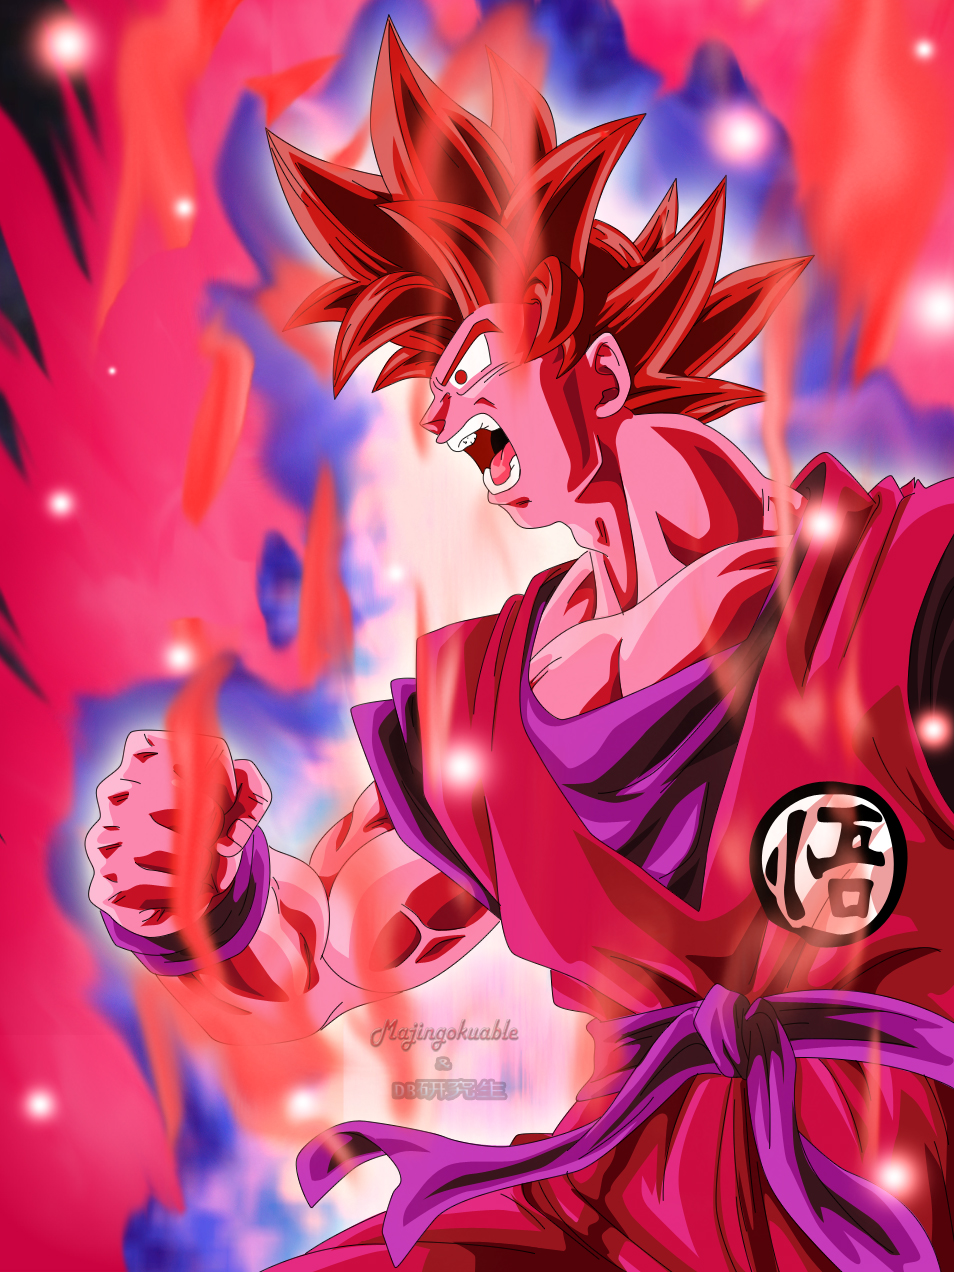 The kaioken also increases goku's strength, but it has key differences...